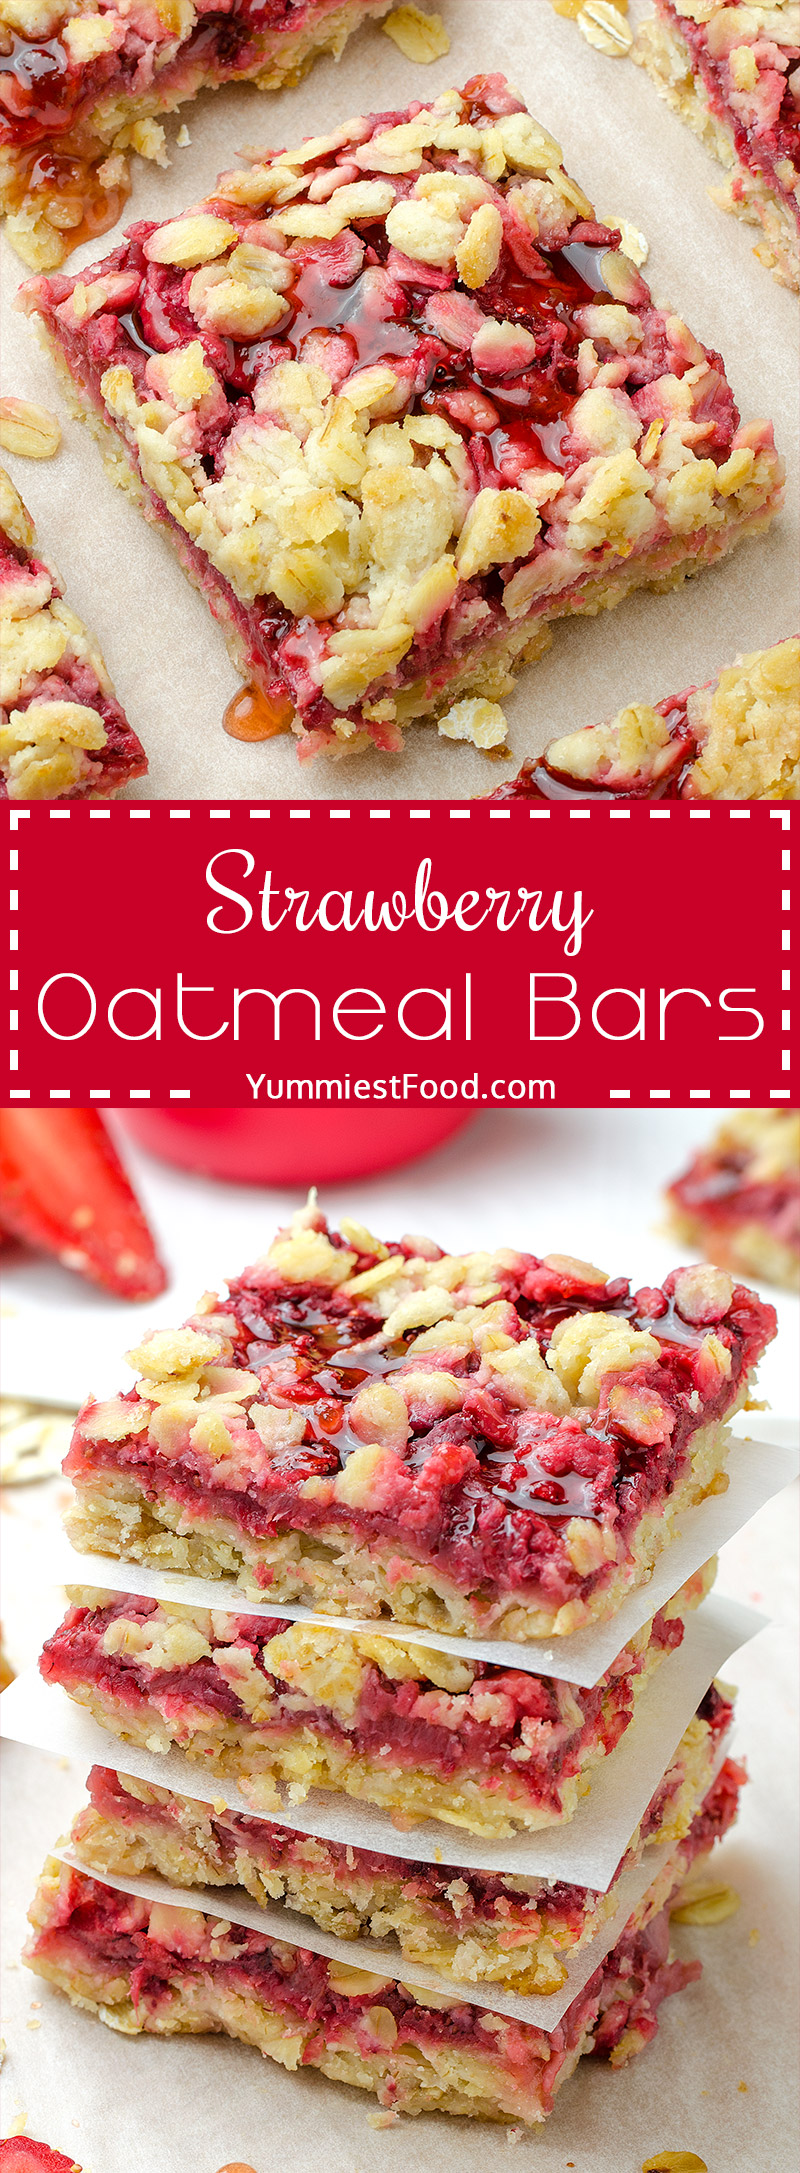 The best way to start your day - Healthy Breakfast Strawberry Oatmeal Bars